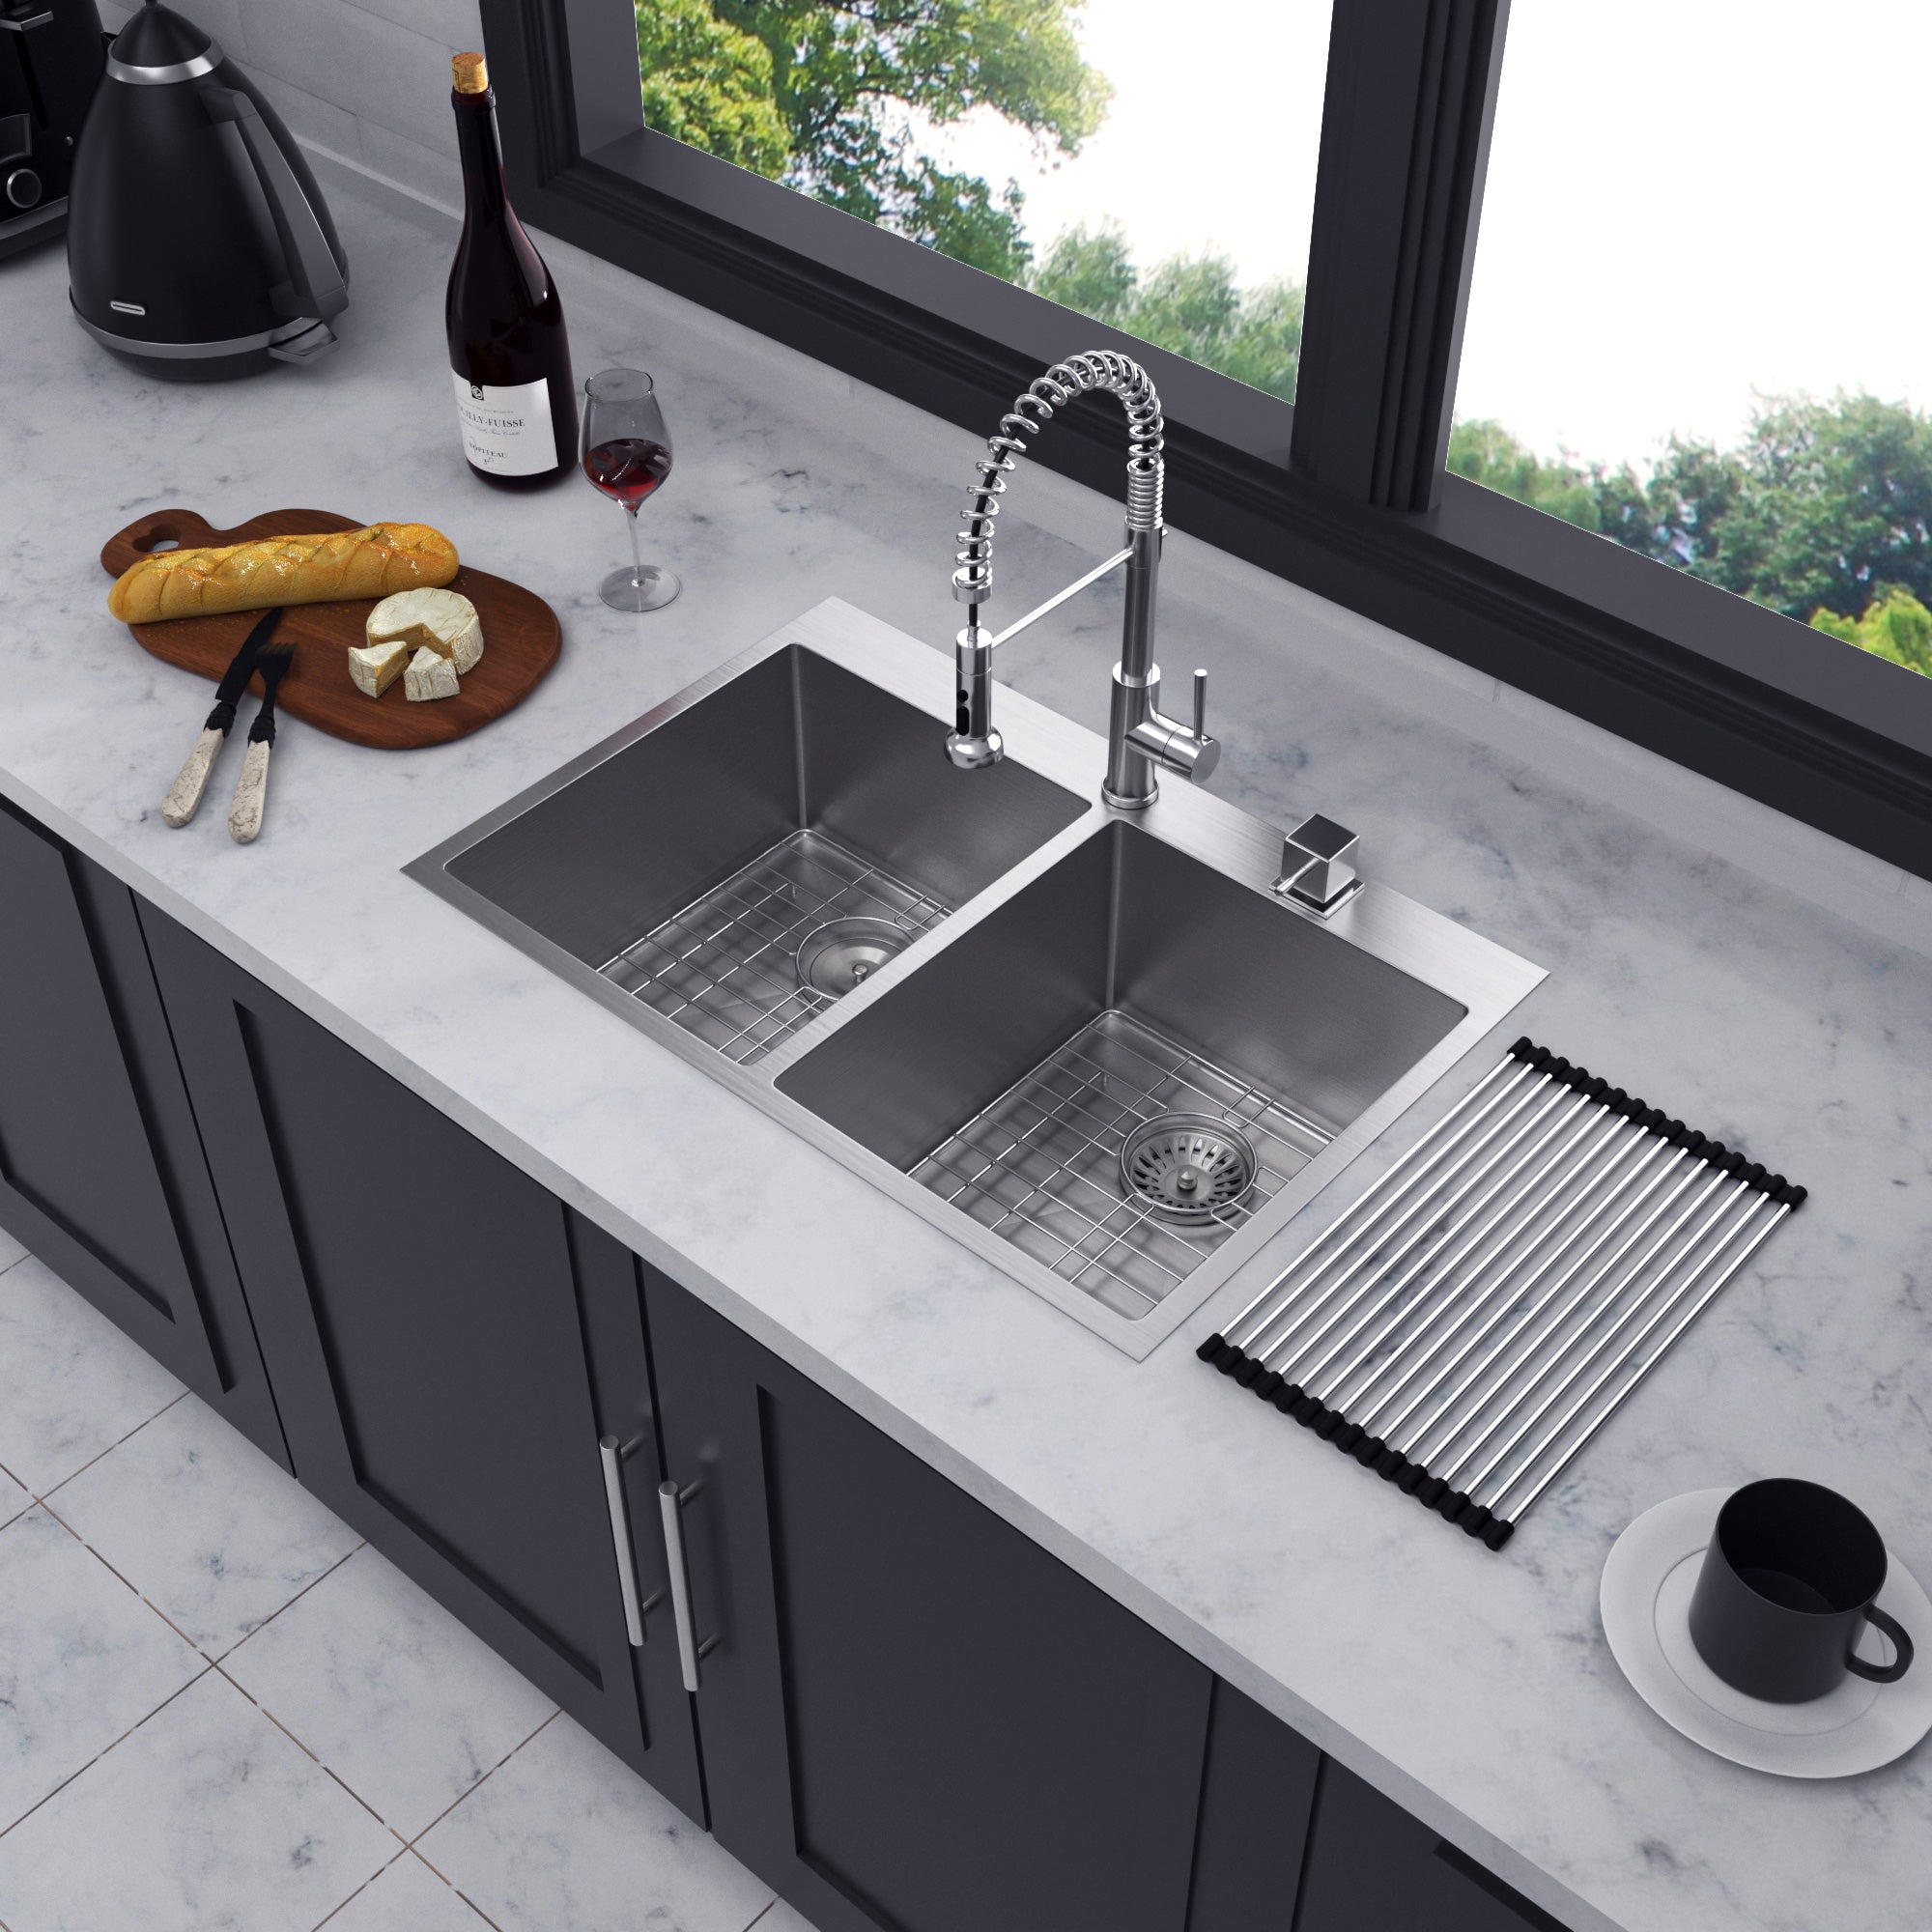 Drop-in Double Bowl Stainless Steel Kitchen Sink RX-SS21